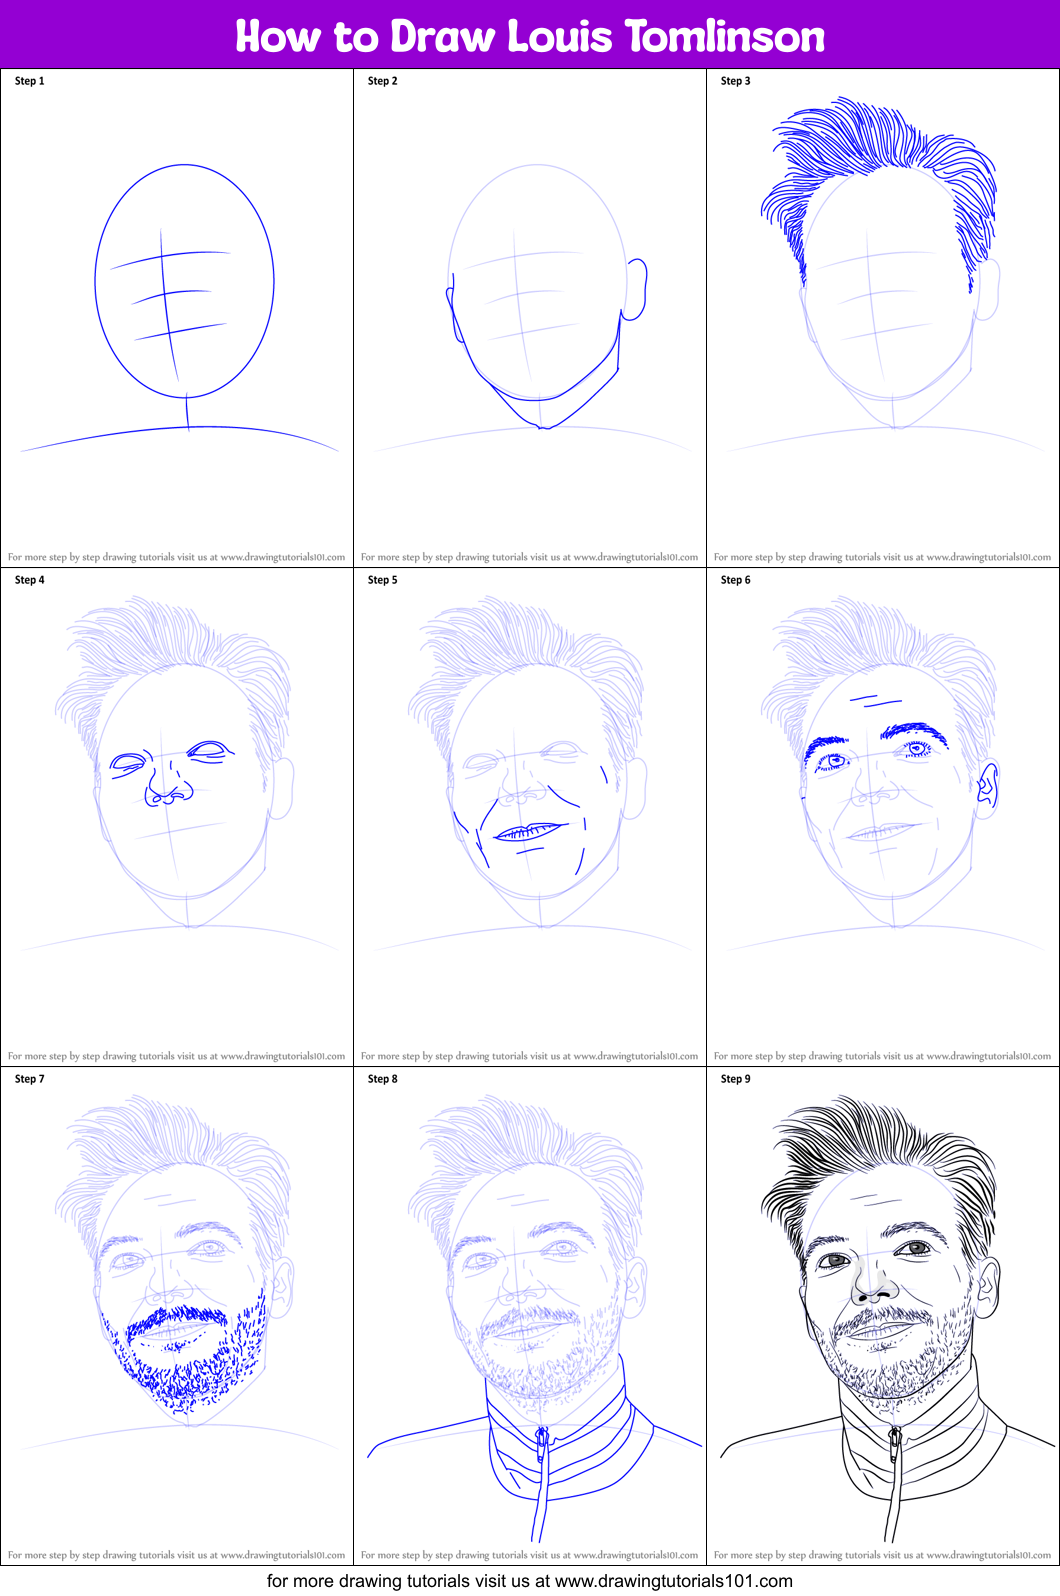 How To Draw Chibi Louis Tomlinson From 1d, Step by Step, Drawing